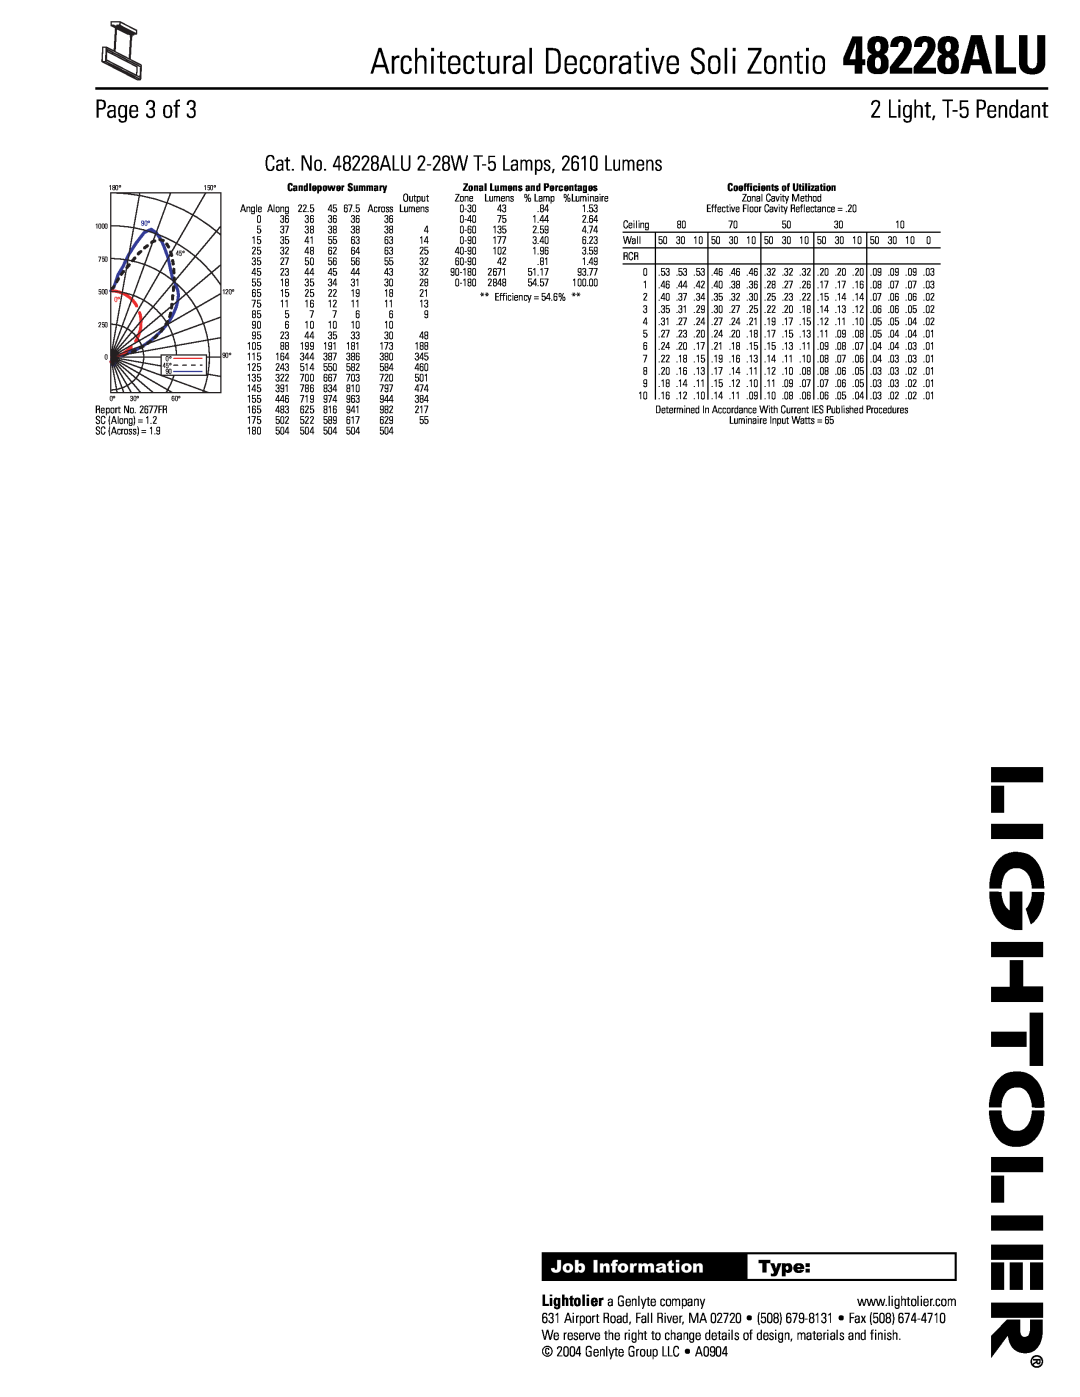 Lightolier dimensions Page 3 of, Architectural Decorative Soli Zontio 48228ALU, Light, T-5Pendant, Job Information, Type 